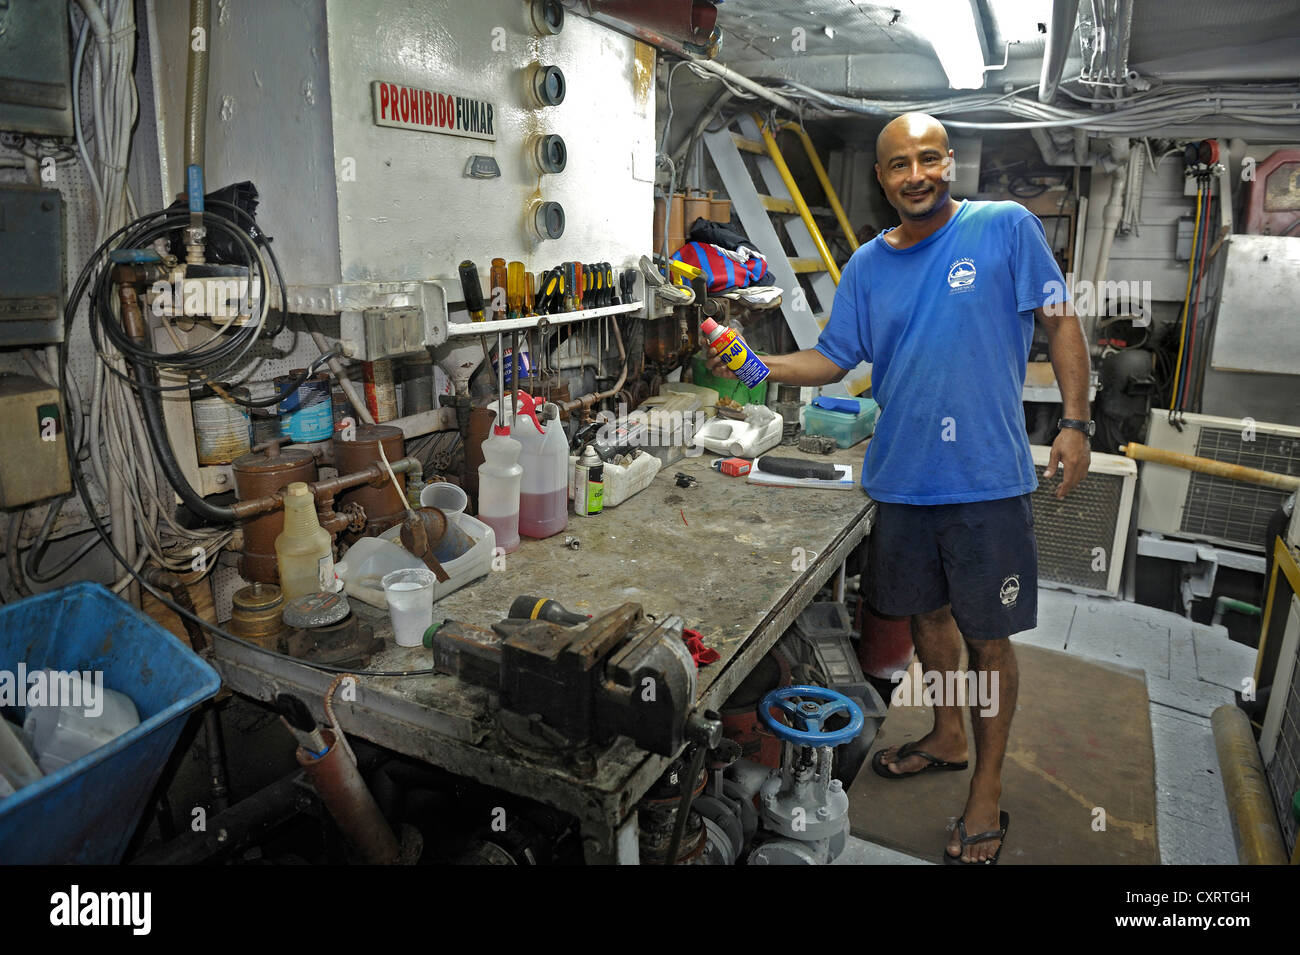 Workbench and the machinist in the engine room of a ship, Okeanoss Aggressor, Costa Rica, Central America Stock Photo